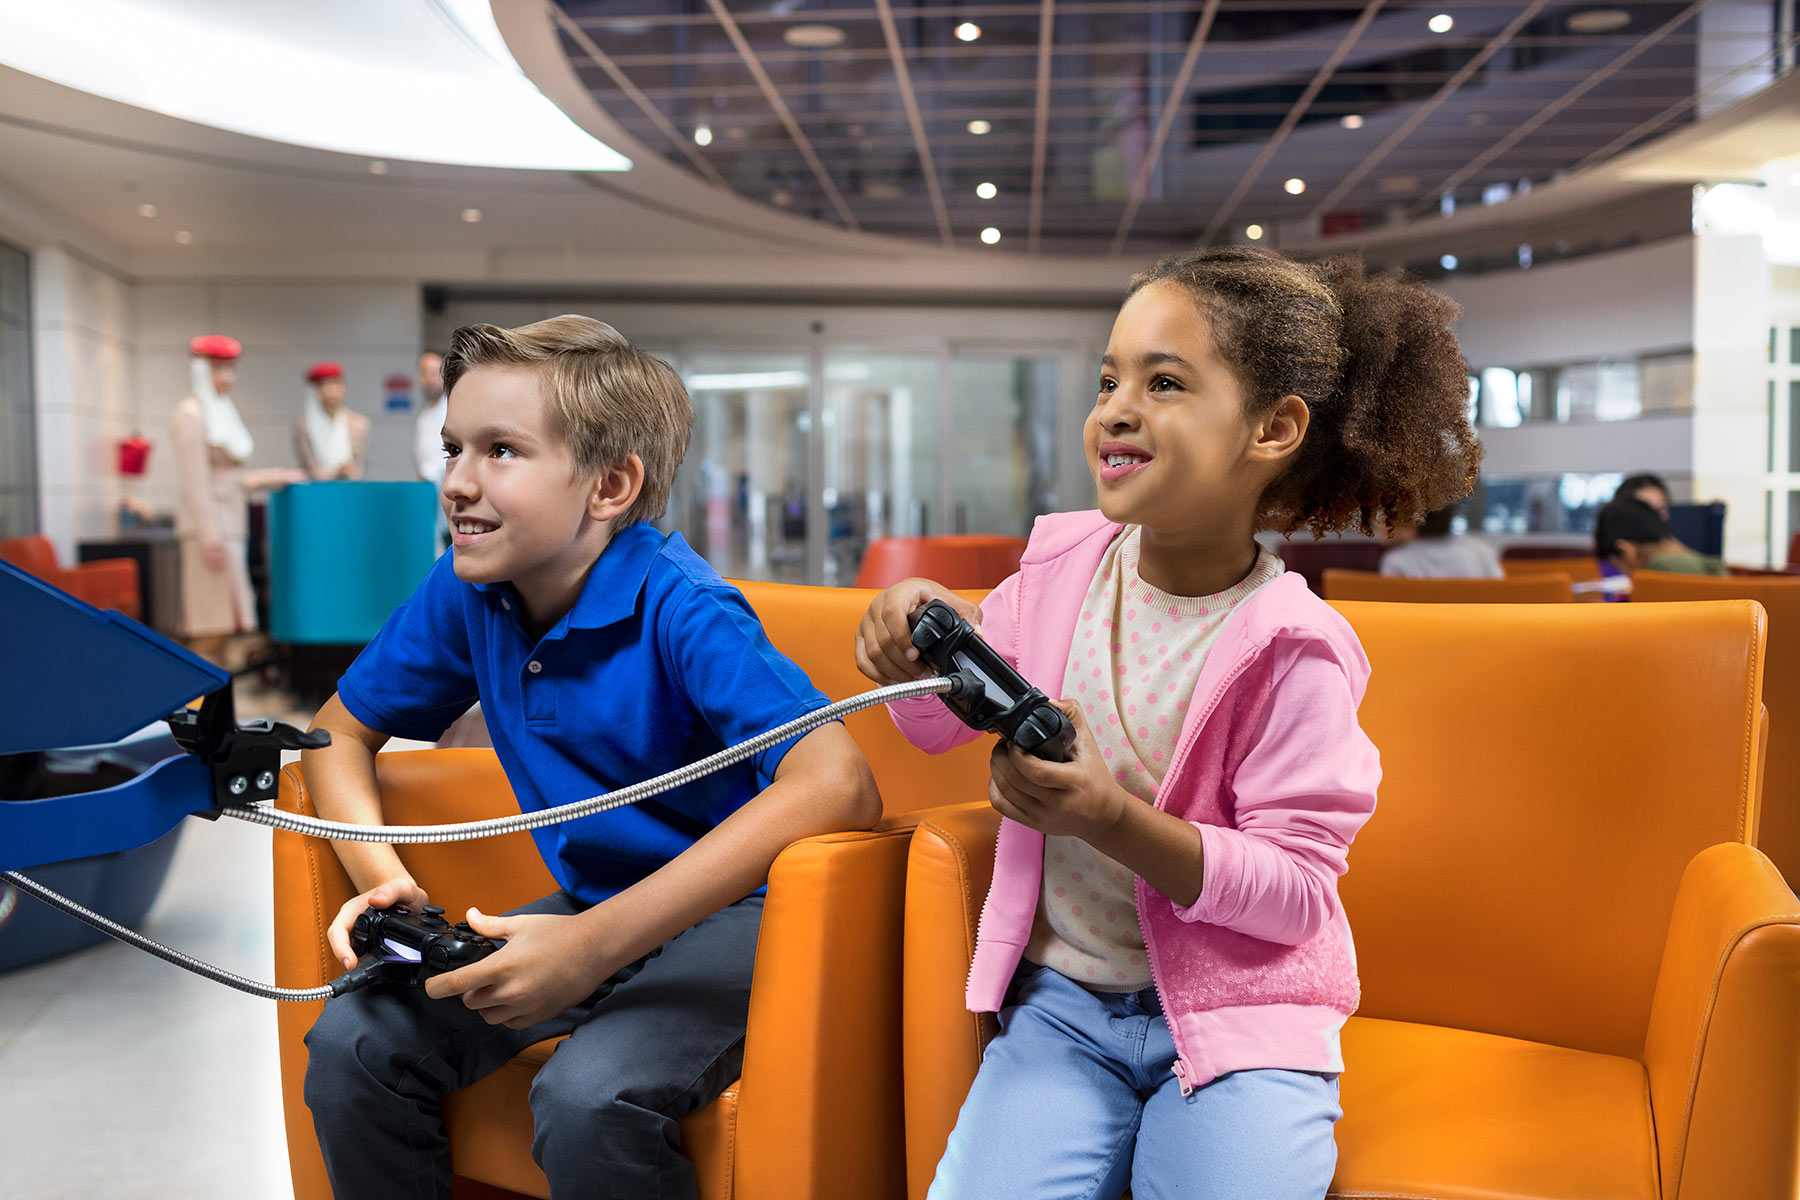 Richard Boll shows two young children on orange chairs with game controllers at Dubai Airport